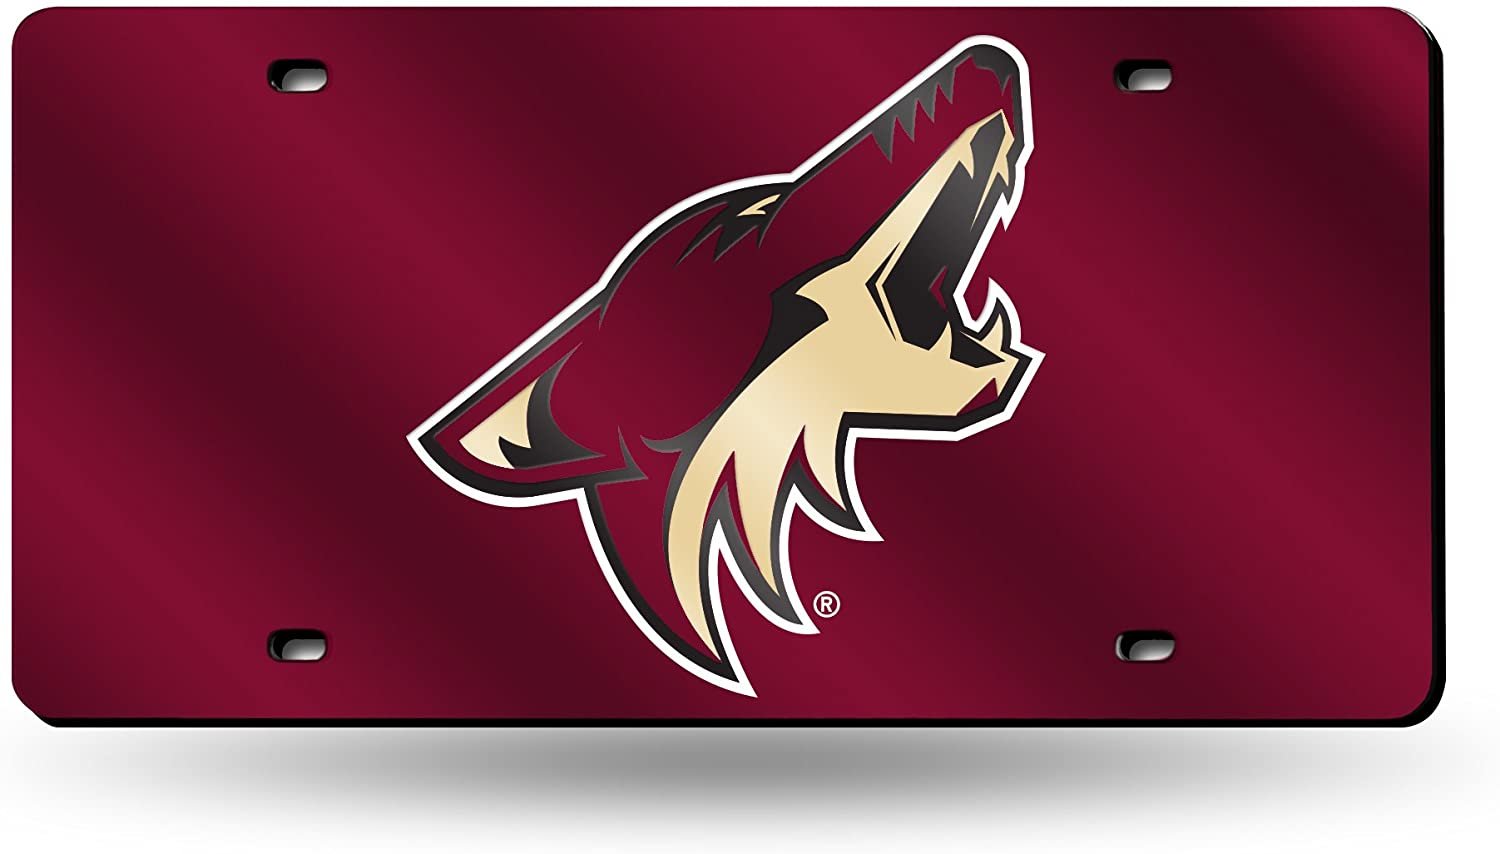 Arizona Coyotes Premium Laser Cut Tag License Plate, Red Mirrored Acrylic Inlaid, 12x6 Inch